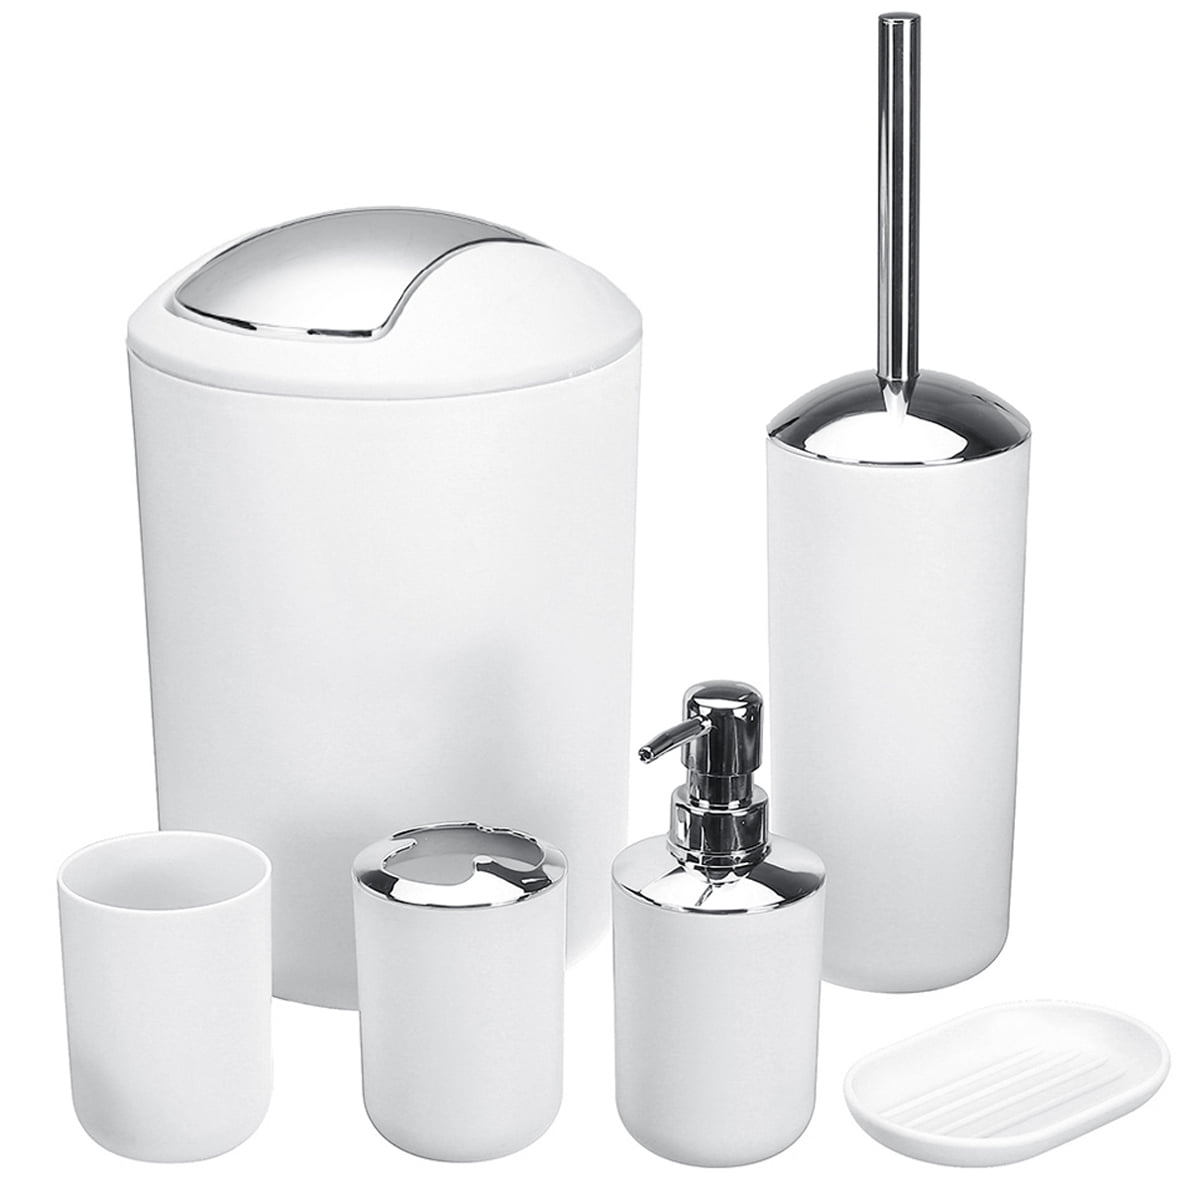 6pcs Bathroom Accessories Wash Set Trash Can Soap Dispenser Toothbrush Cup 